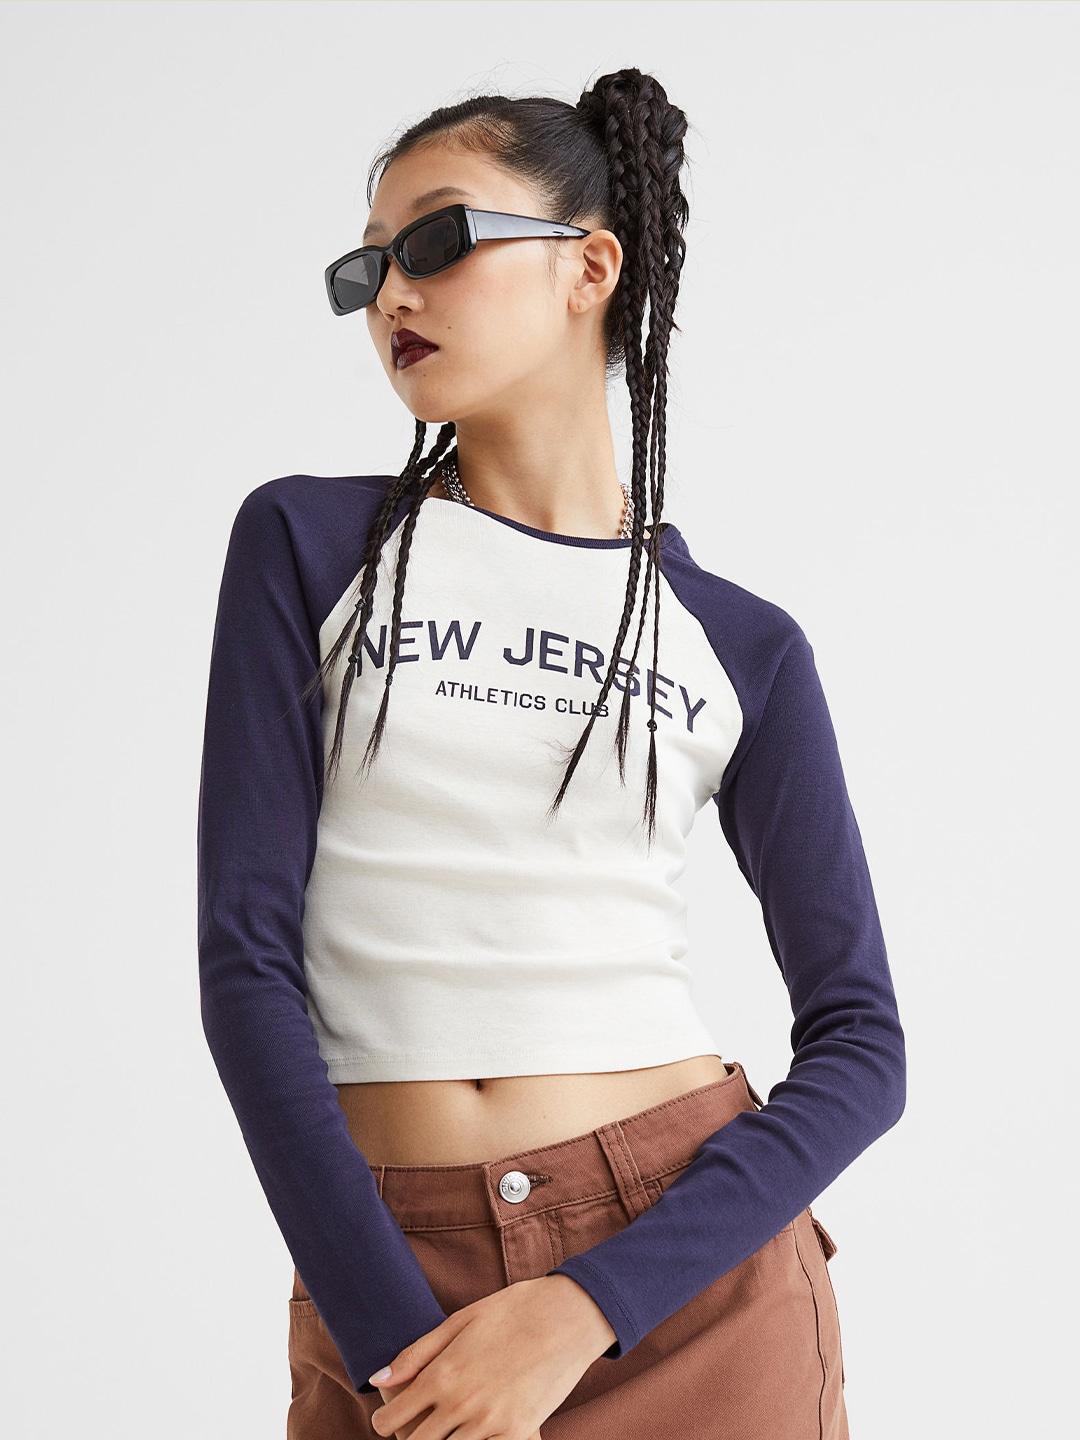 h&m-white-&-blue-print-long-sleeved-pure-cotton-crop-top